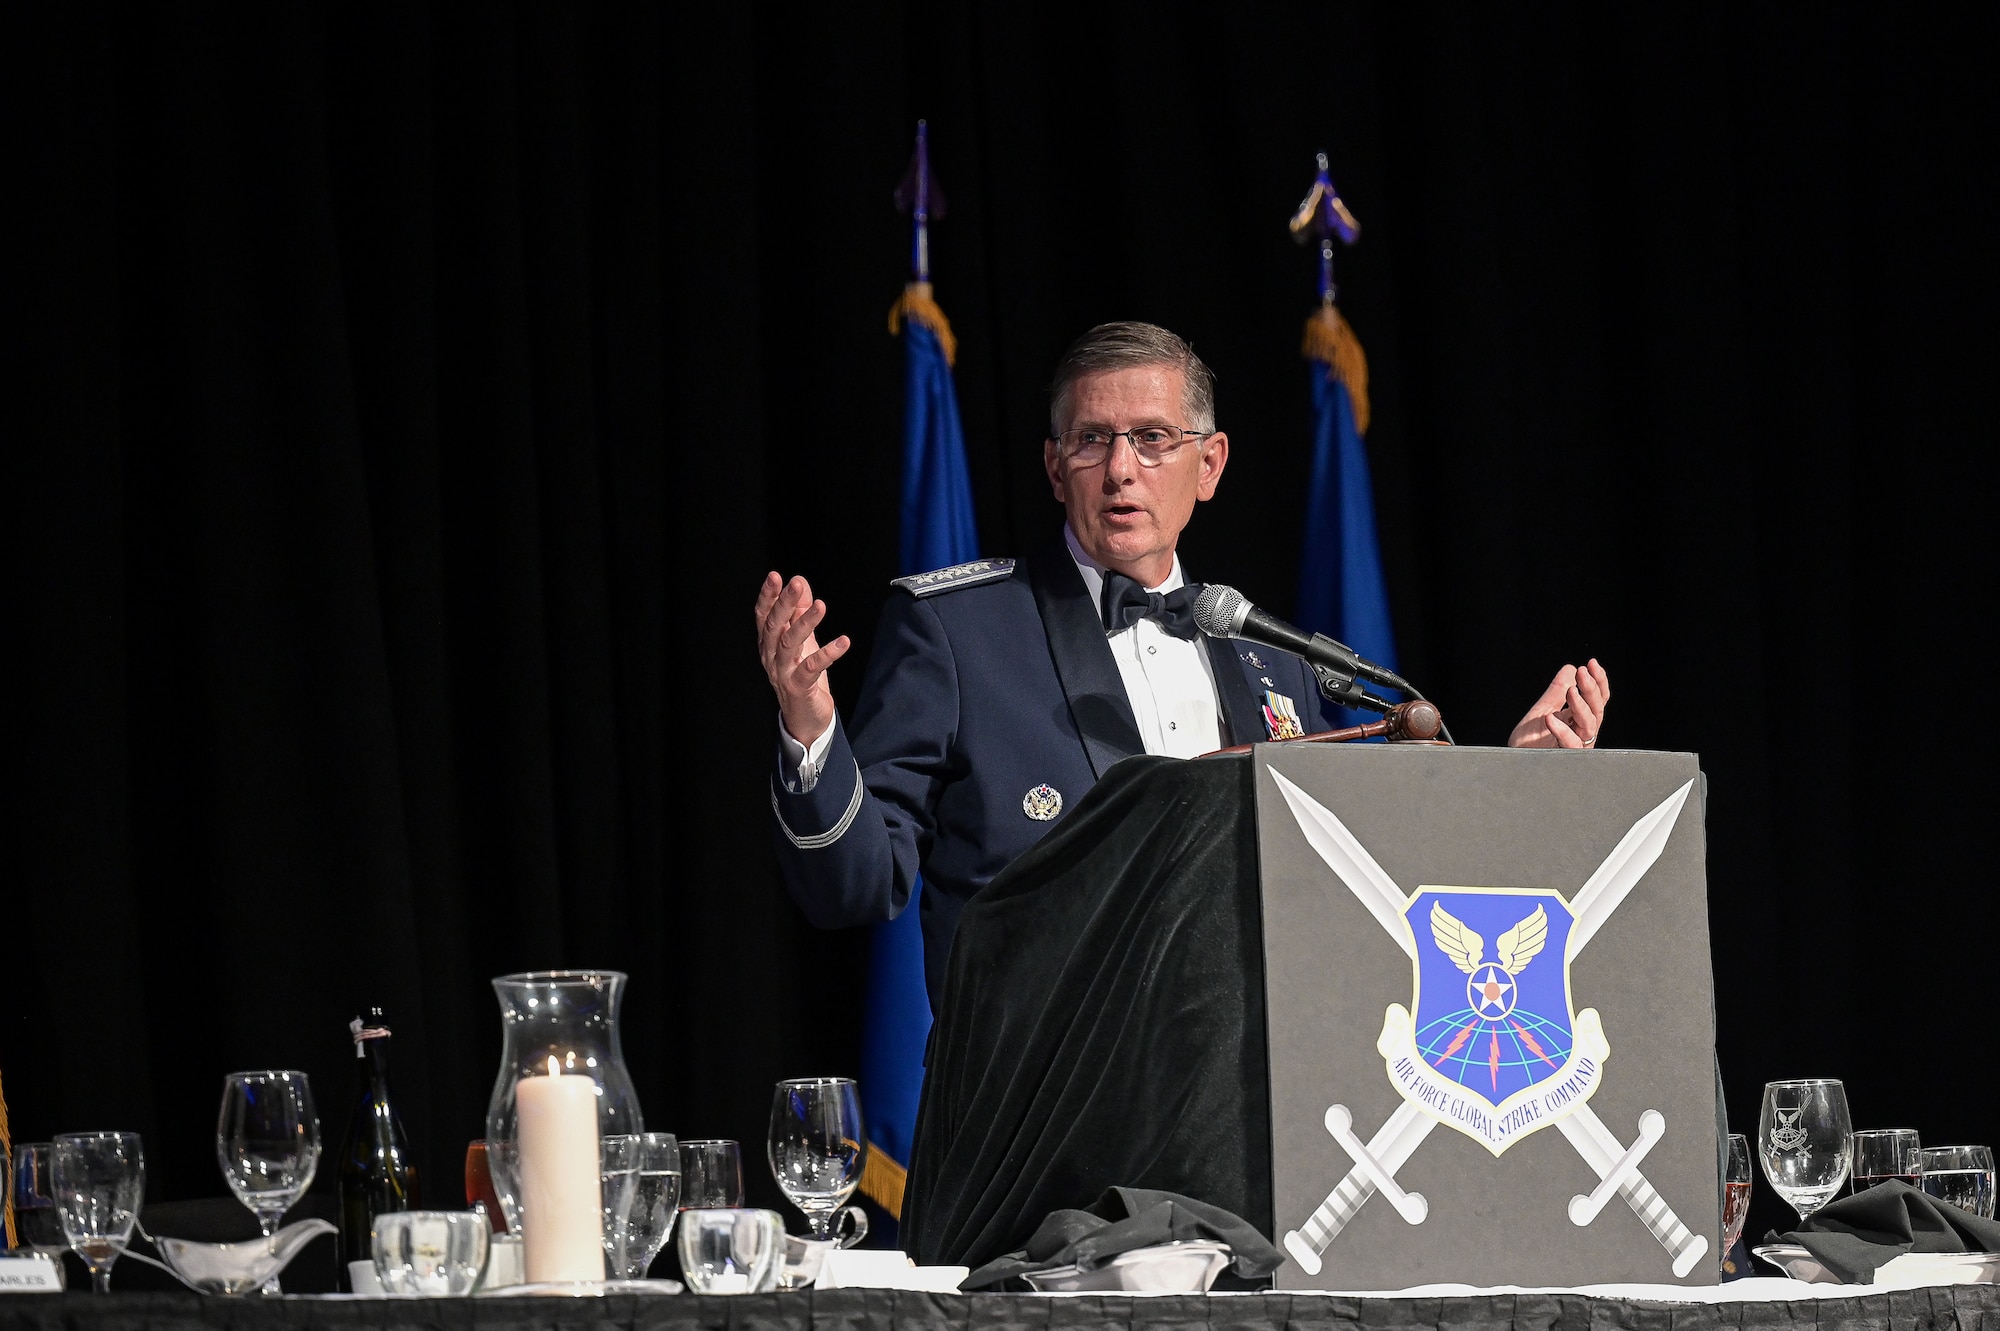 Retired Gen. Timothy M. Ray, former Air Force Global Strike Command commander, offers his thanks to AFGSC’s enlisted force during his Order of the Sword ceremony at Sam’s Hotel and Casino, Shreveport, Louisiana, May 11, 2022. The Order of the Sword is a rare honor bestowed on a senior officer or civilian by the non-commissioned officers of a command to recognize individuals who have made significant contributions to the enlisted corps. (U.S. Air Force photo by Senior Airman Jonathan E. Ramos)